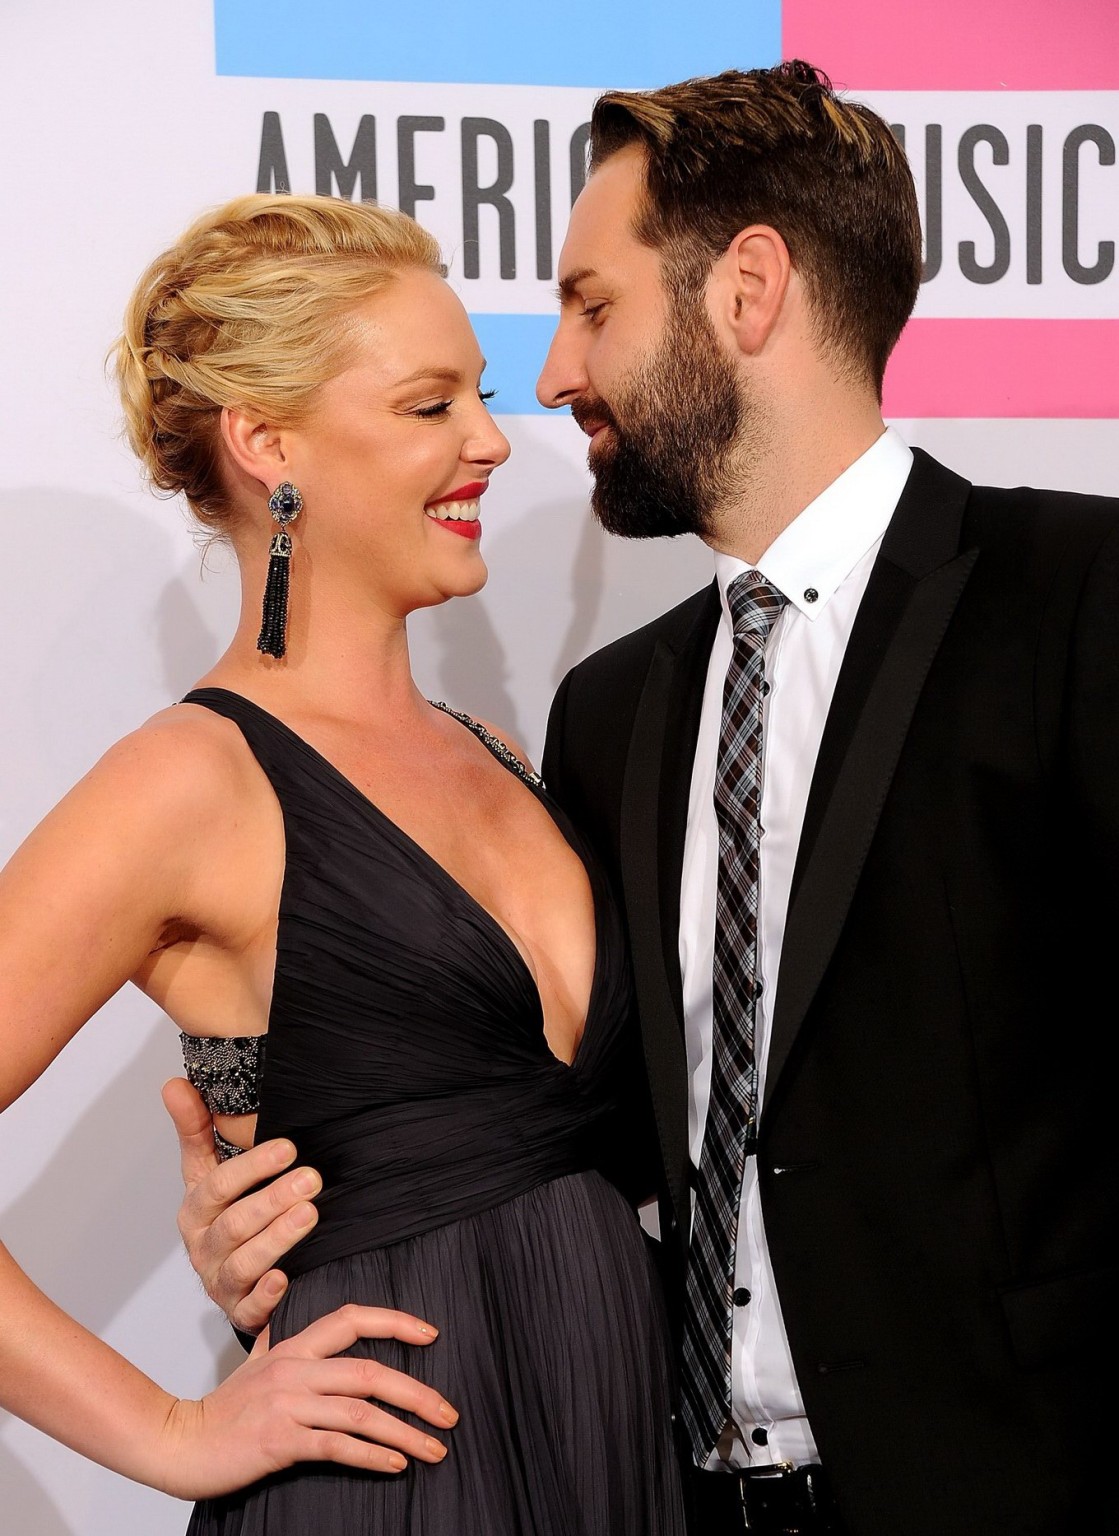 Katherine Heigl braless showing side boob at the American Music Awards in LA #75281594